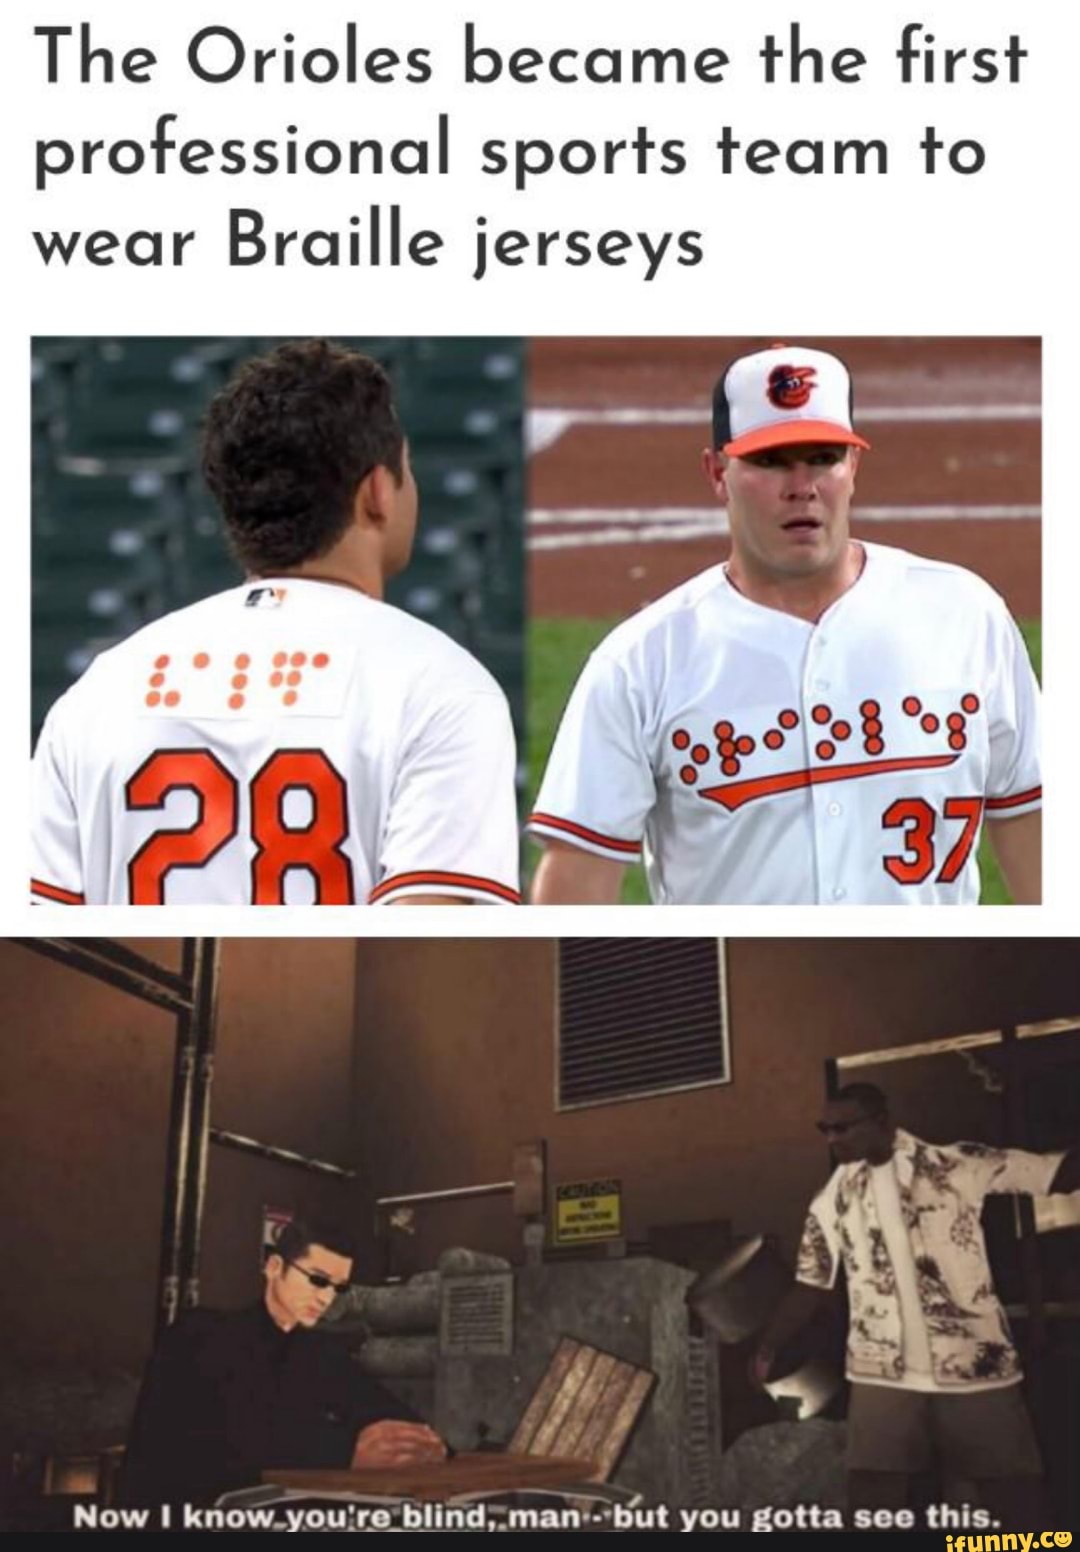 MLB Tonight, the @Oriotes became the first pro team to wear uniforms with  Braille lettering. Replying to @MLB @Orio'es and - Purpose“? Blind can't  see or allowed on field touch players backs..?